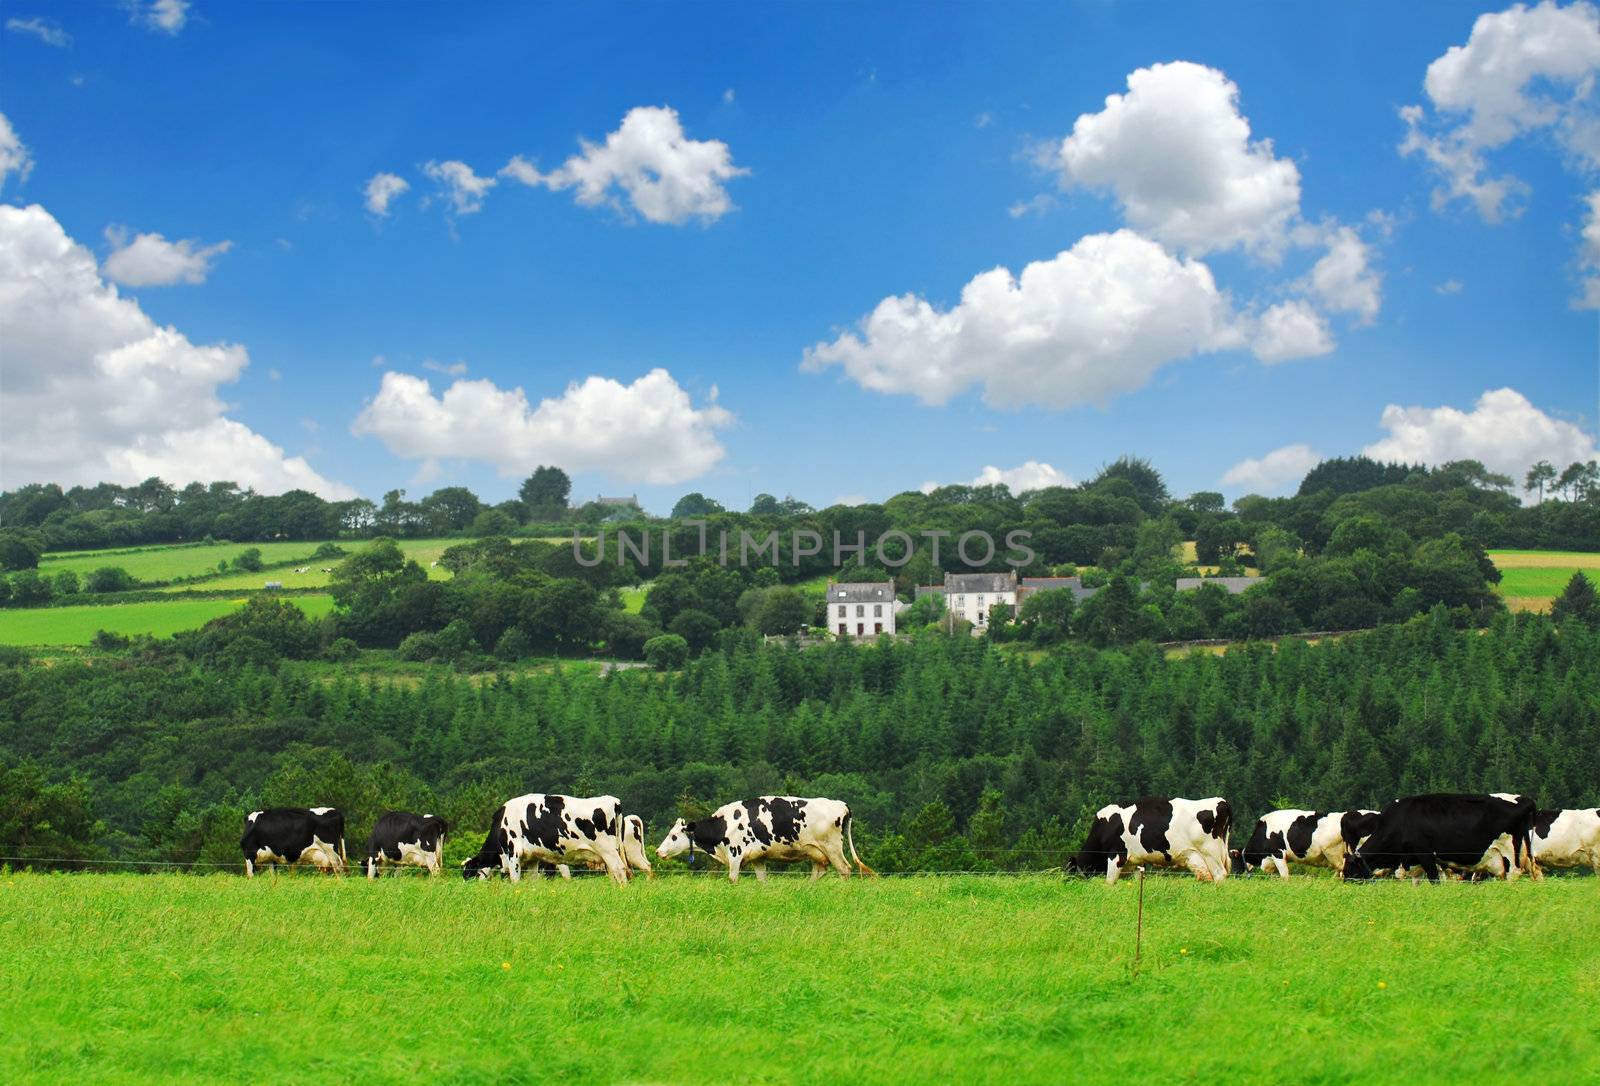 Cows in a pasture by elenathewise